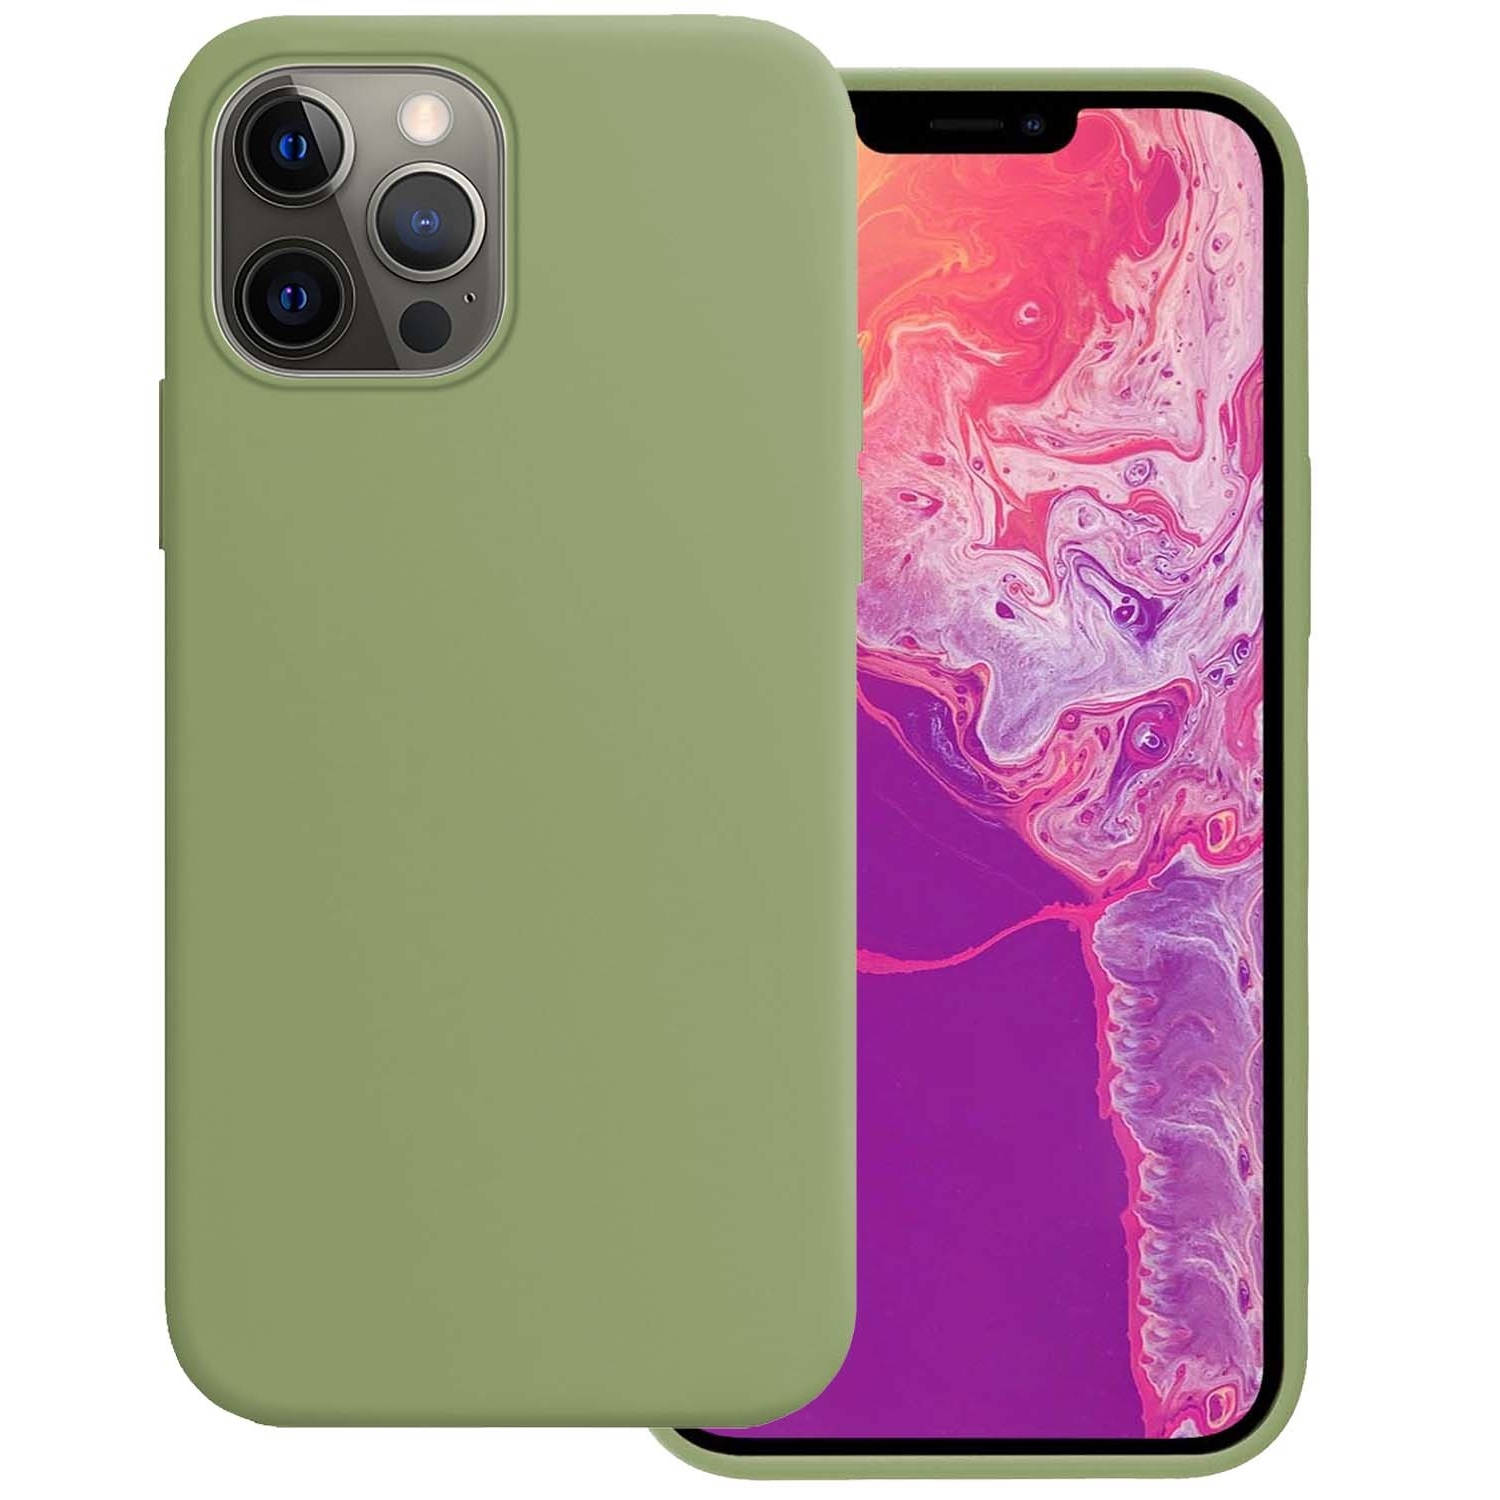 Basey iPhone 14 Pro Max Hoesje Siliconen Hoes Case Cover iPhone 14 Pro Max-Groen